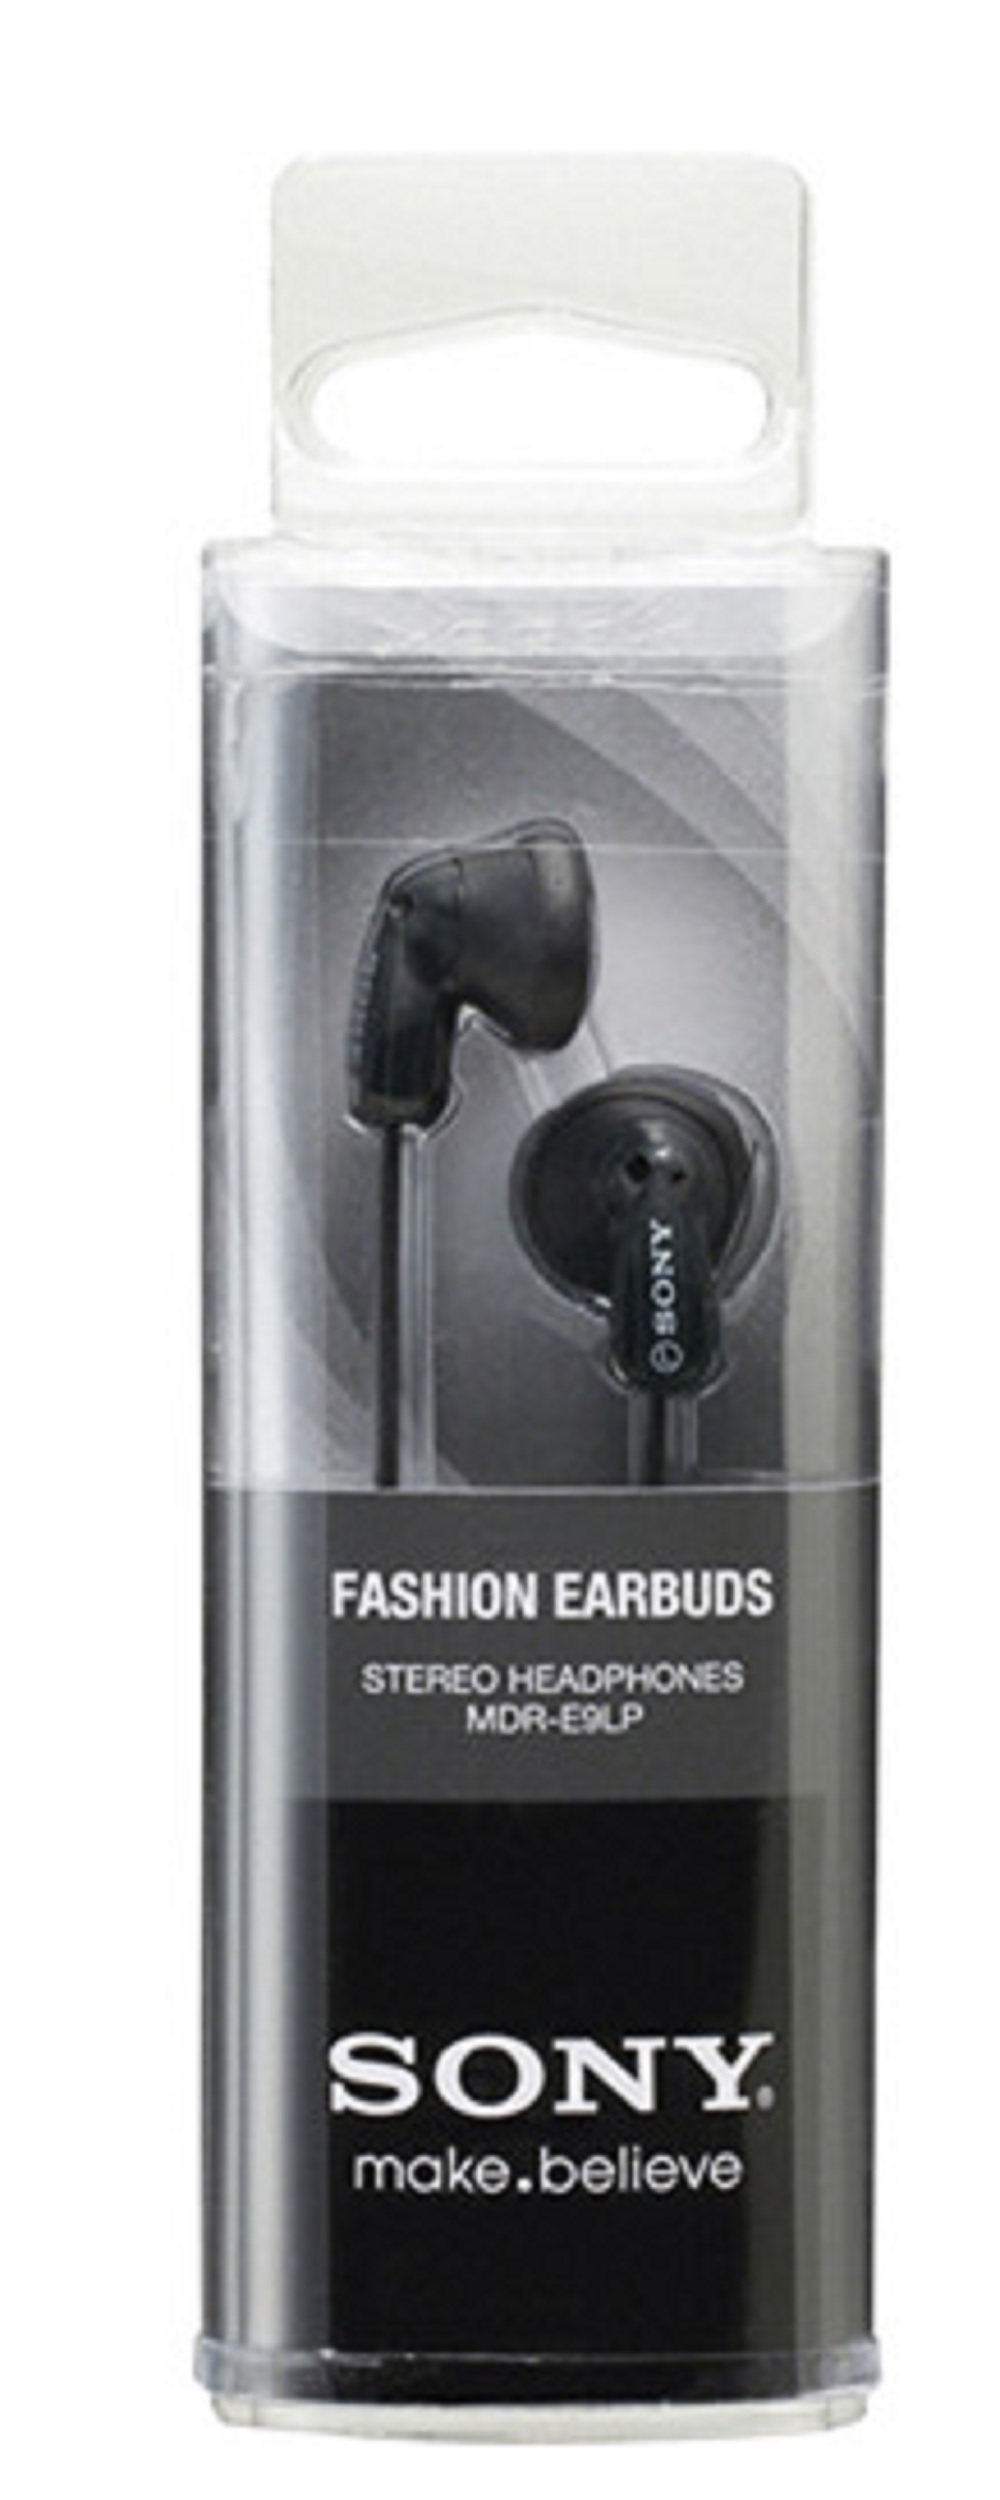 Sony MDR-E9LP Stereo Earbuds in Black